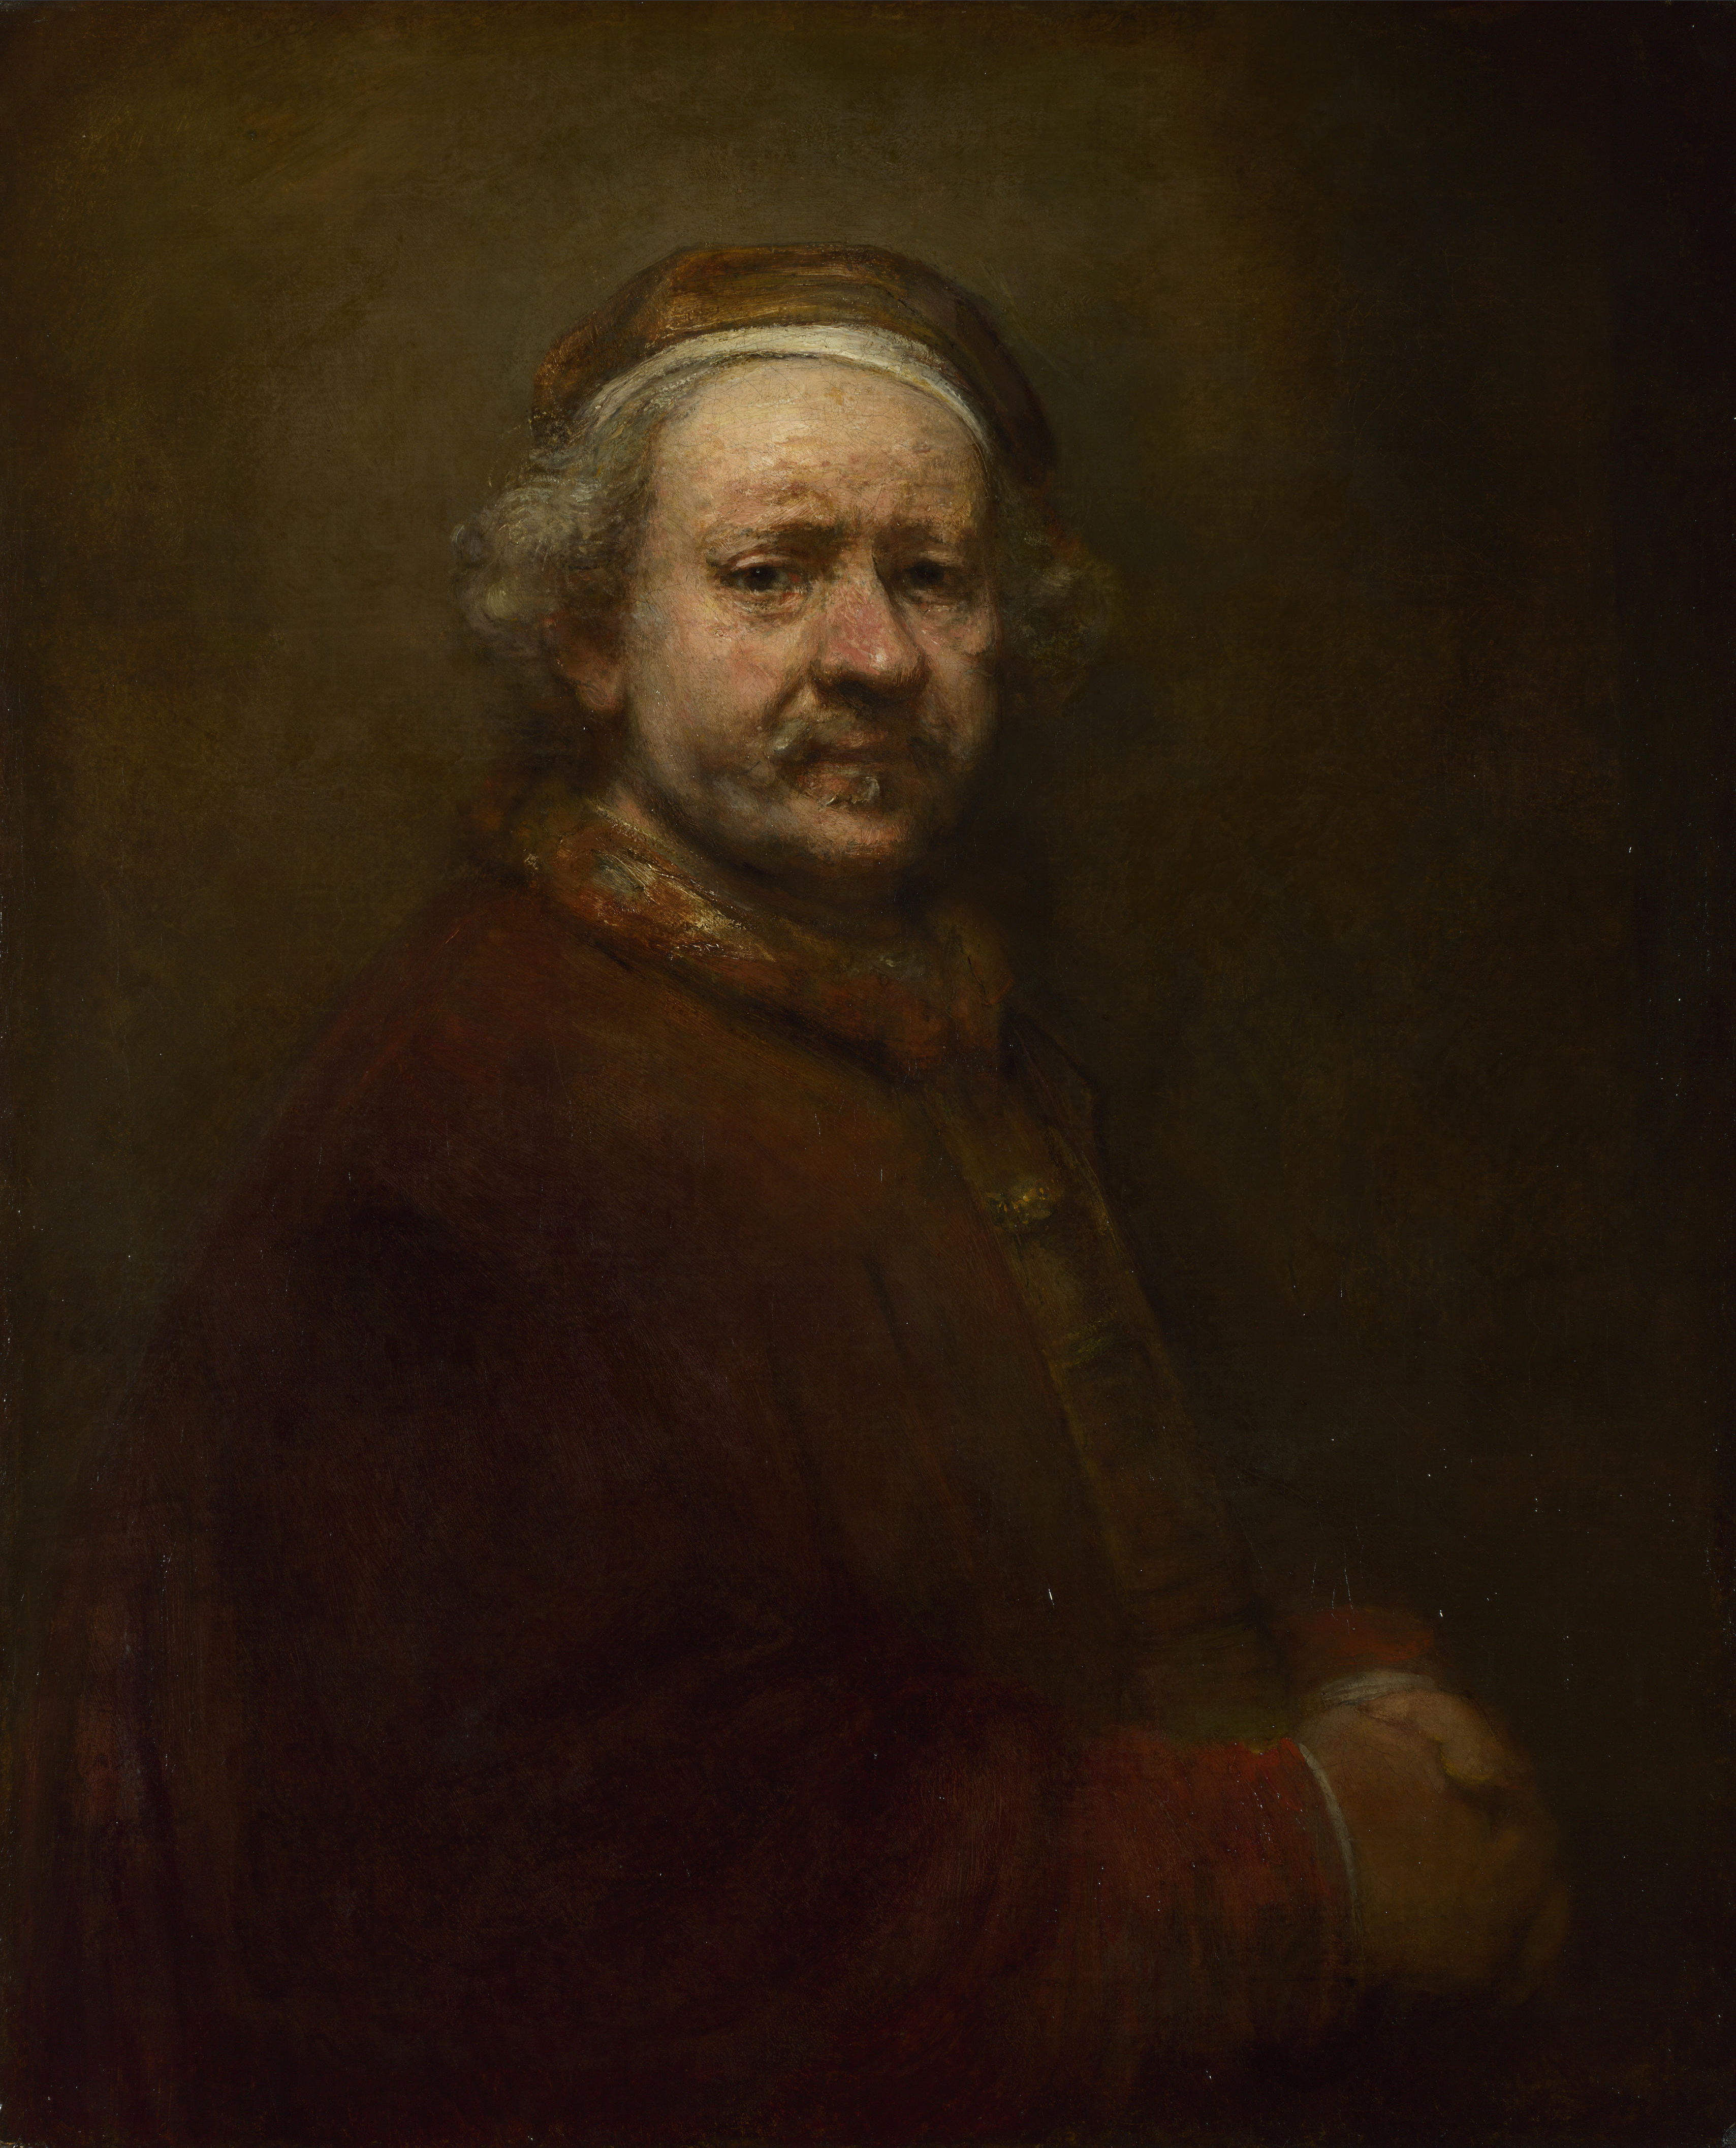 Self-portrait at the age of 63 - Wikipedia